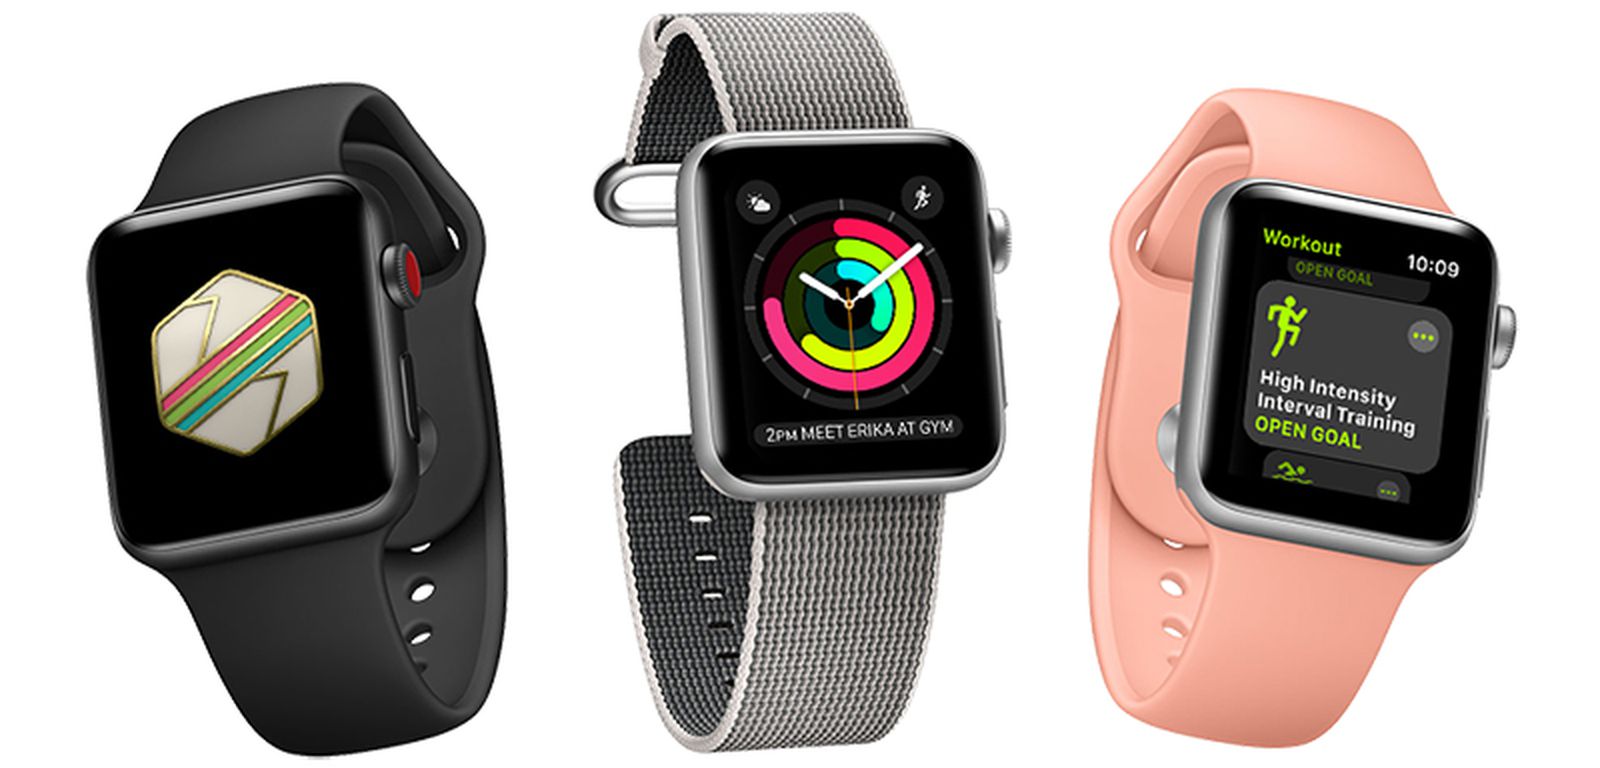 Kuo: Apple Watch Series 3 May Finally Be Discontinued Upon Its Fifth Anniversary..